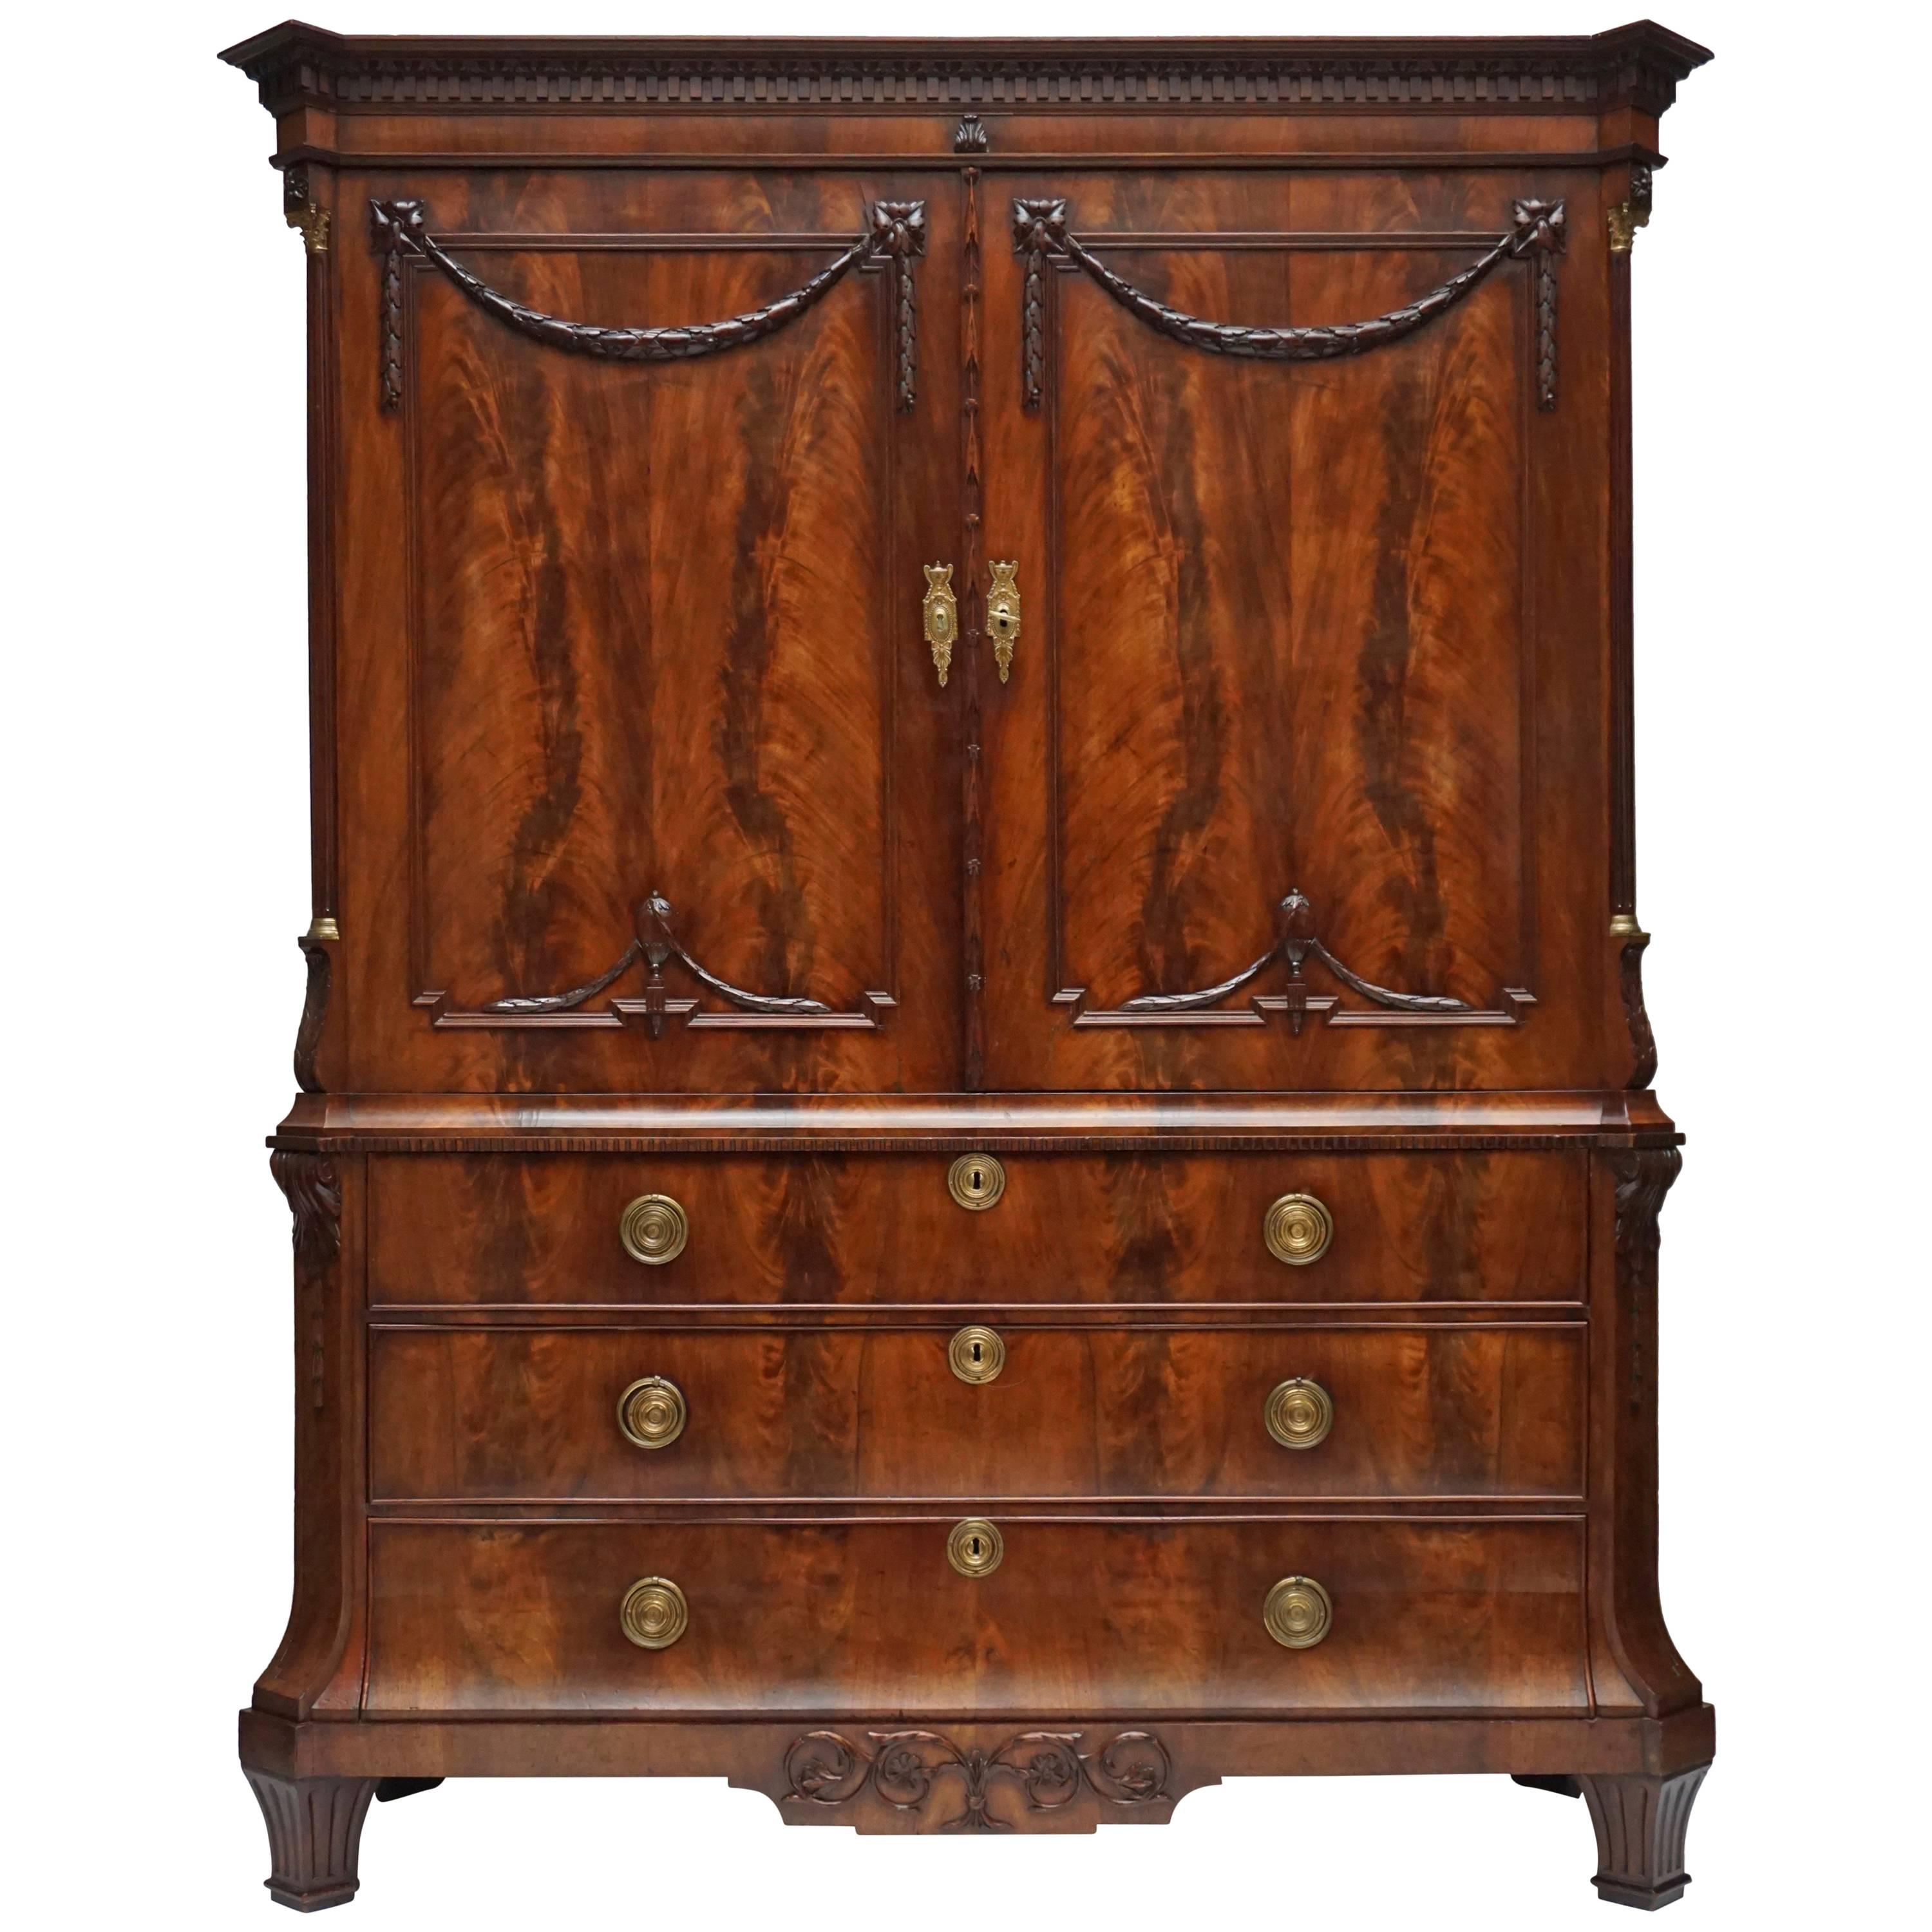 Magnificent 18th Century Mahogany Neoclassical Dutch Cabinet